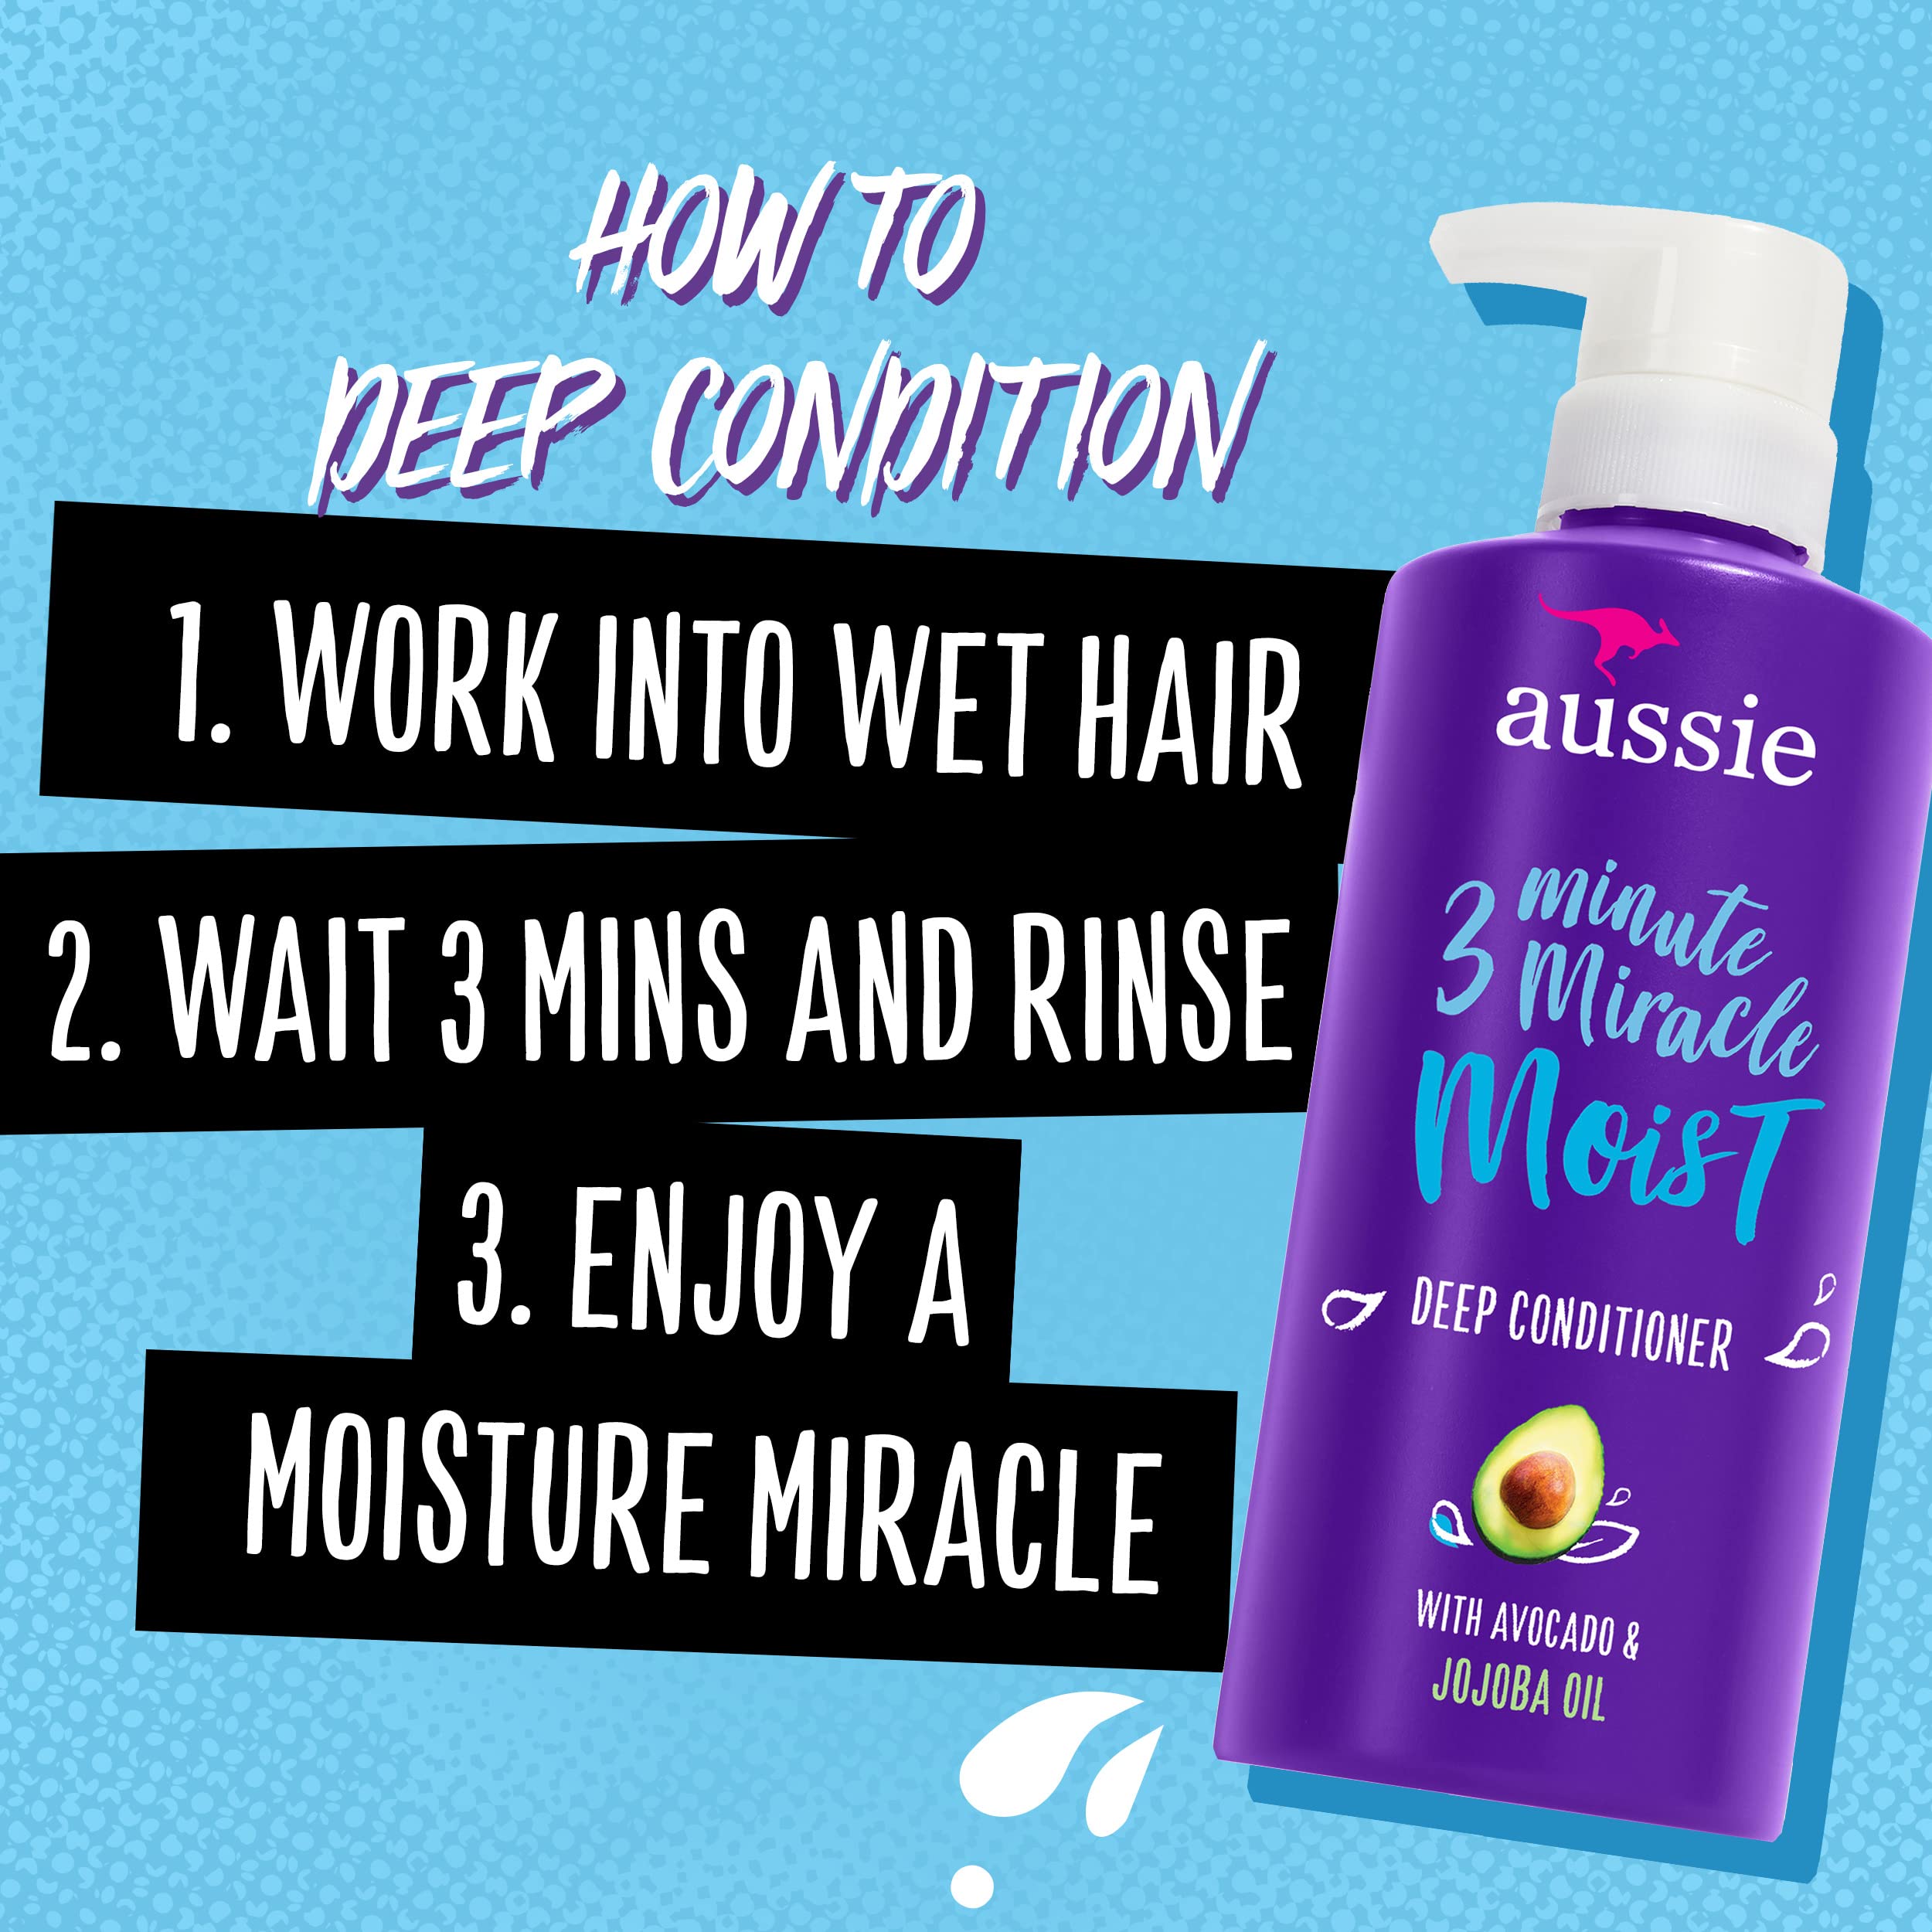 Aussie Deep Conditioner For Dry Hair with Avocado, Paraben Free, 3 Minute Miracle Moist, 16 Fl Oz Each, Triple Pack